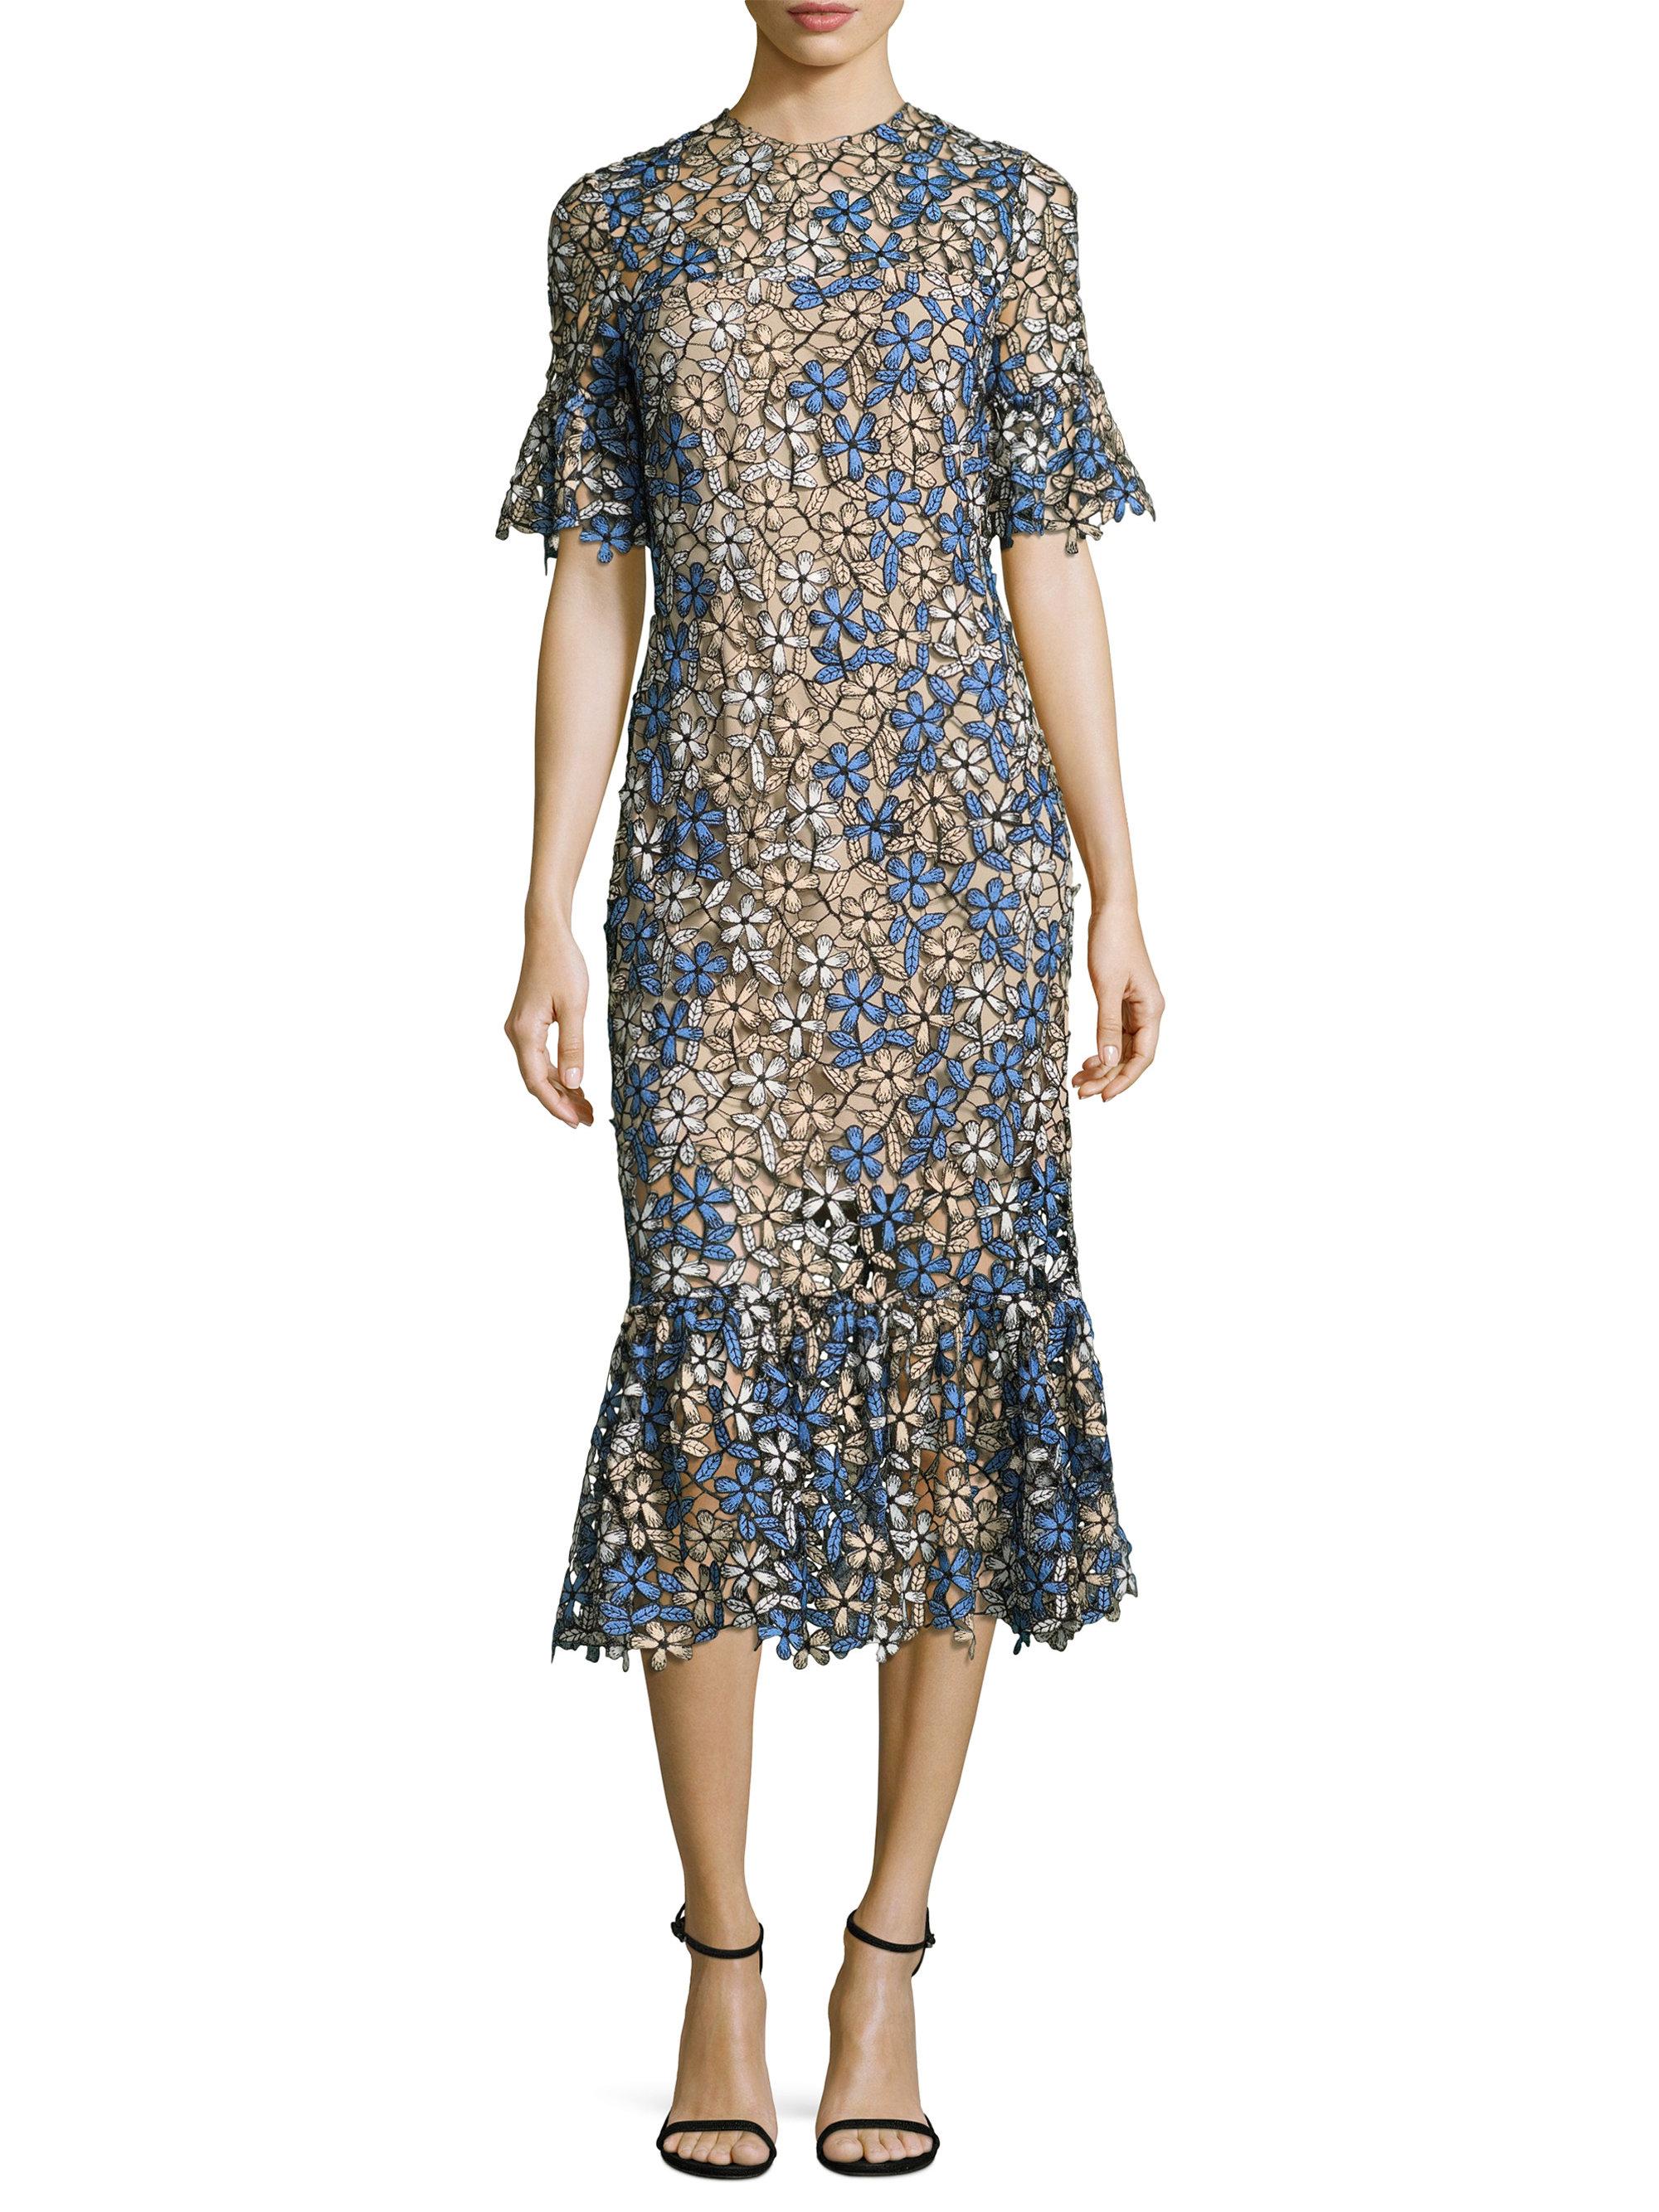 Shoshanna Yuri Floral Lace Dress in French Blue (Blue) - Lyst